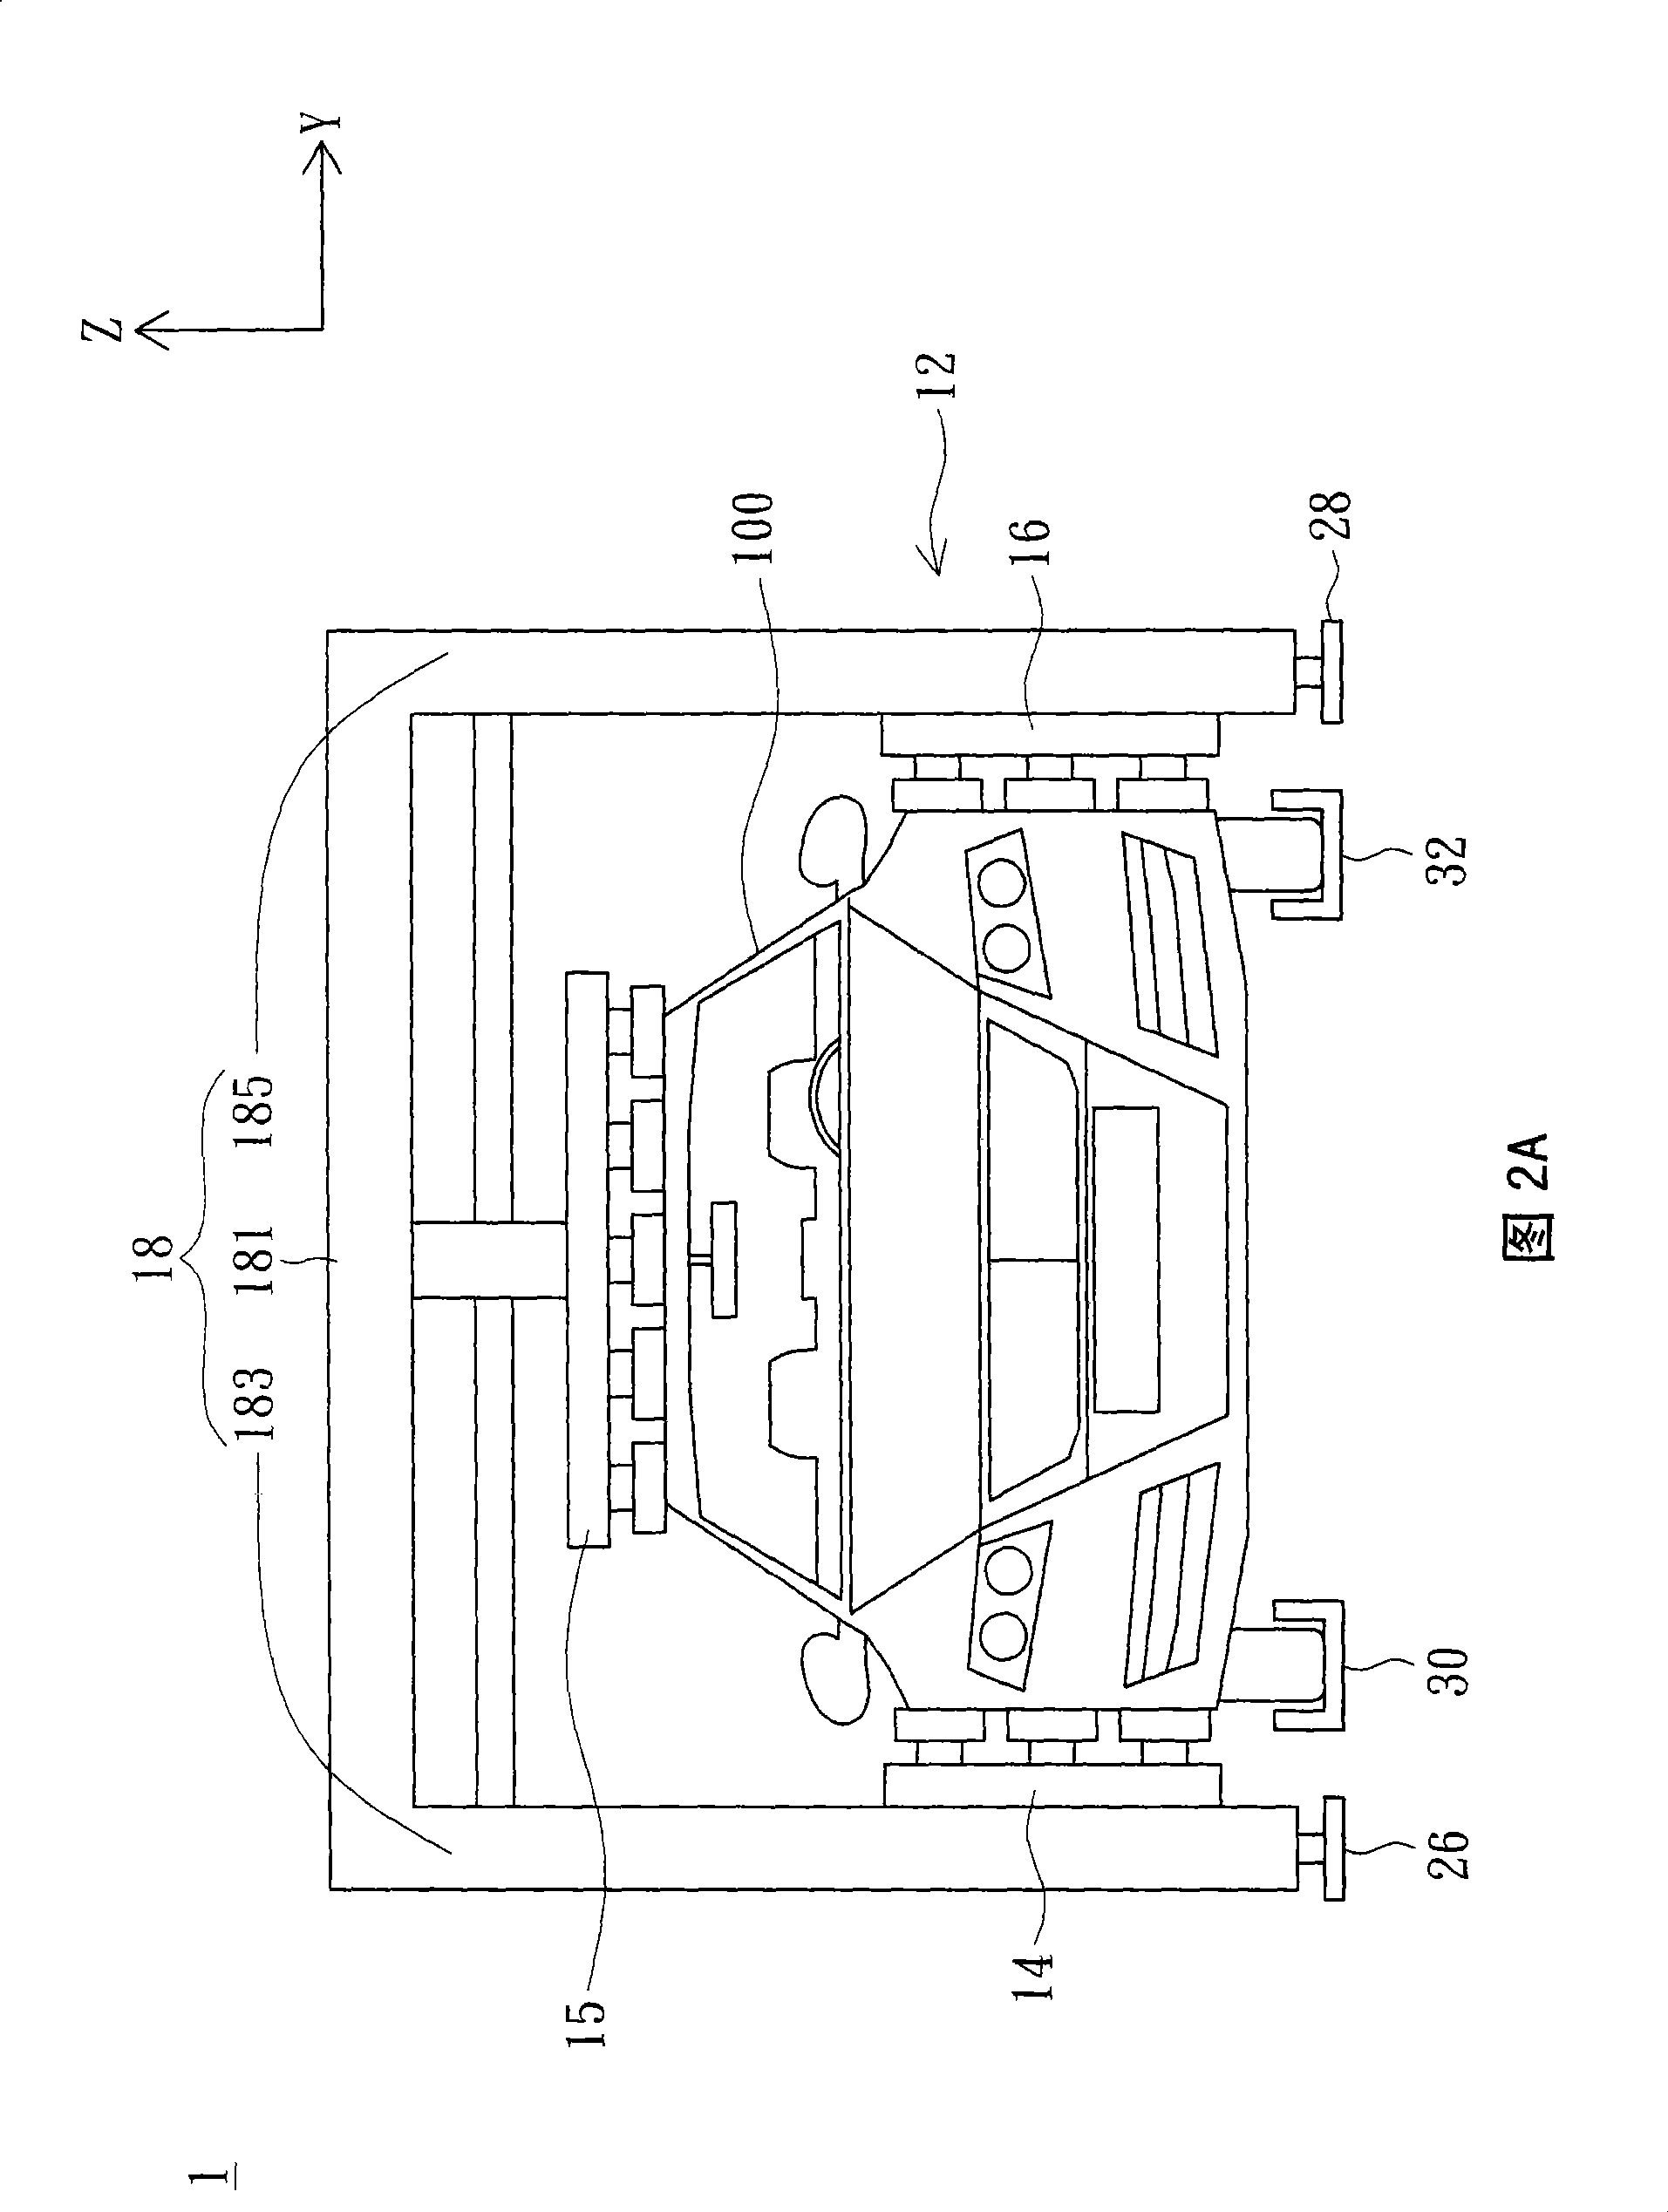 Automatic waxing device and method